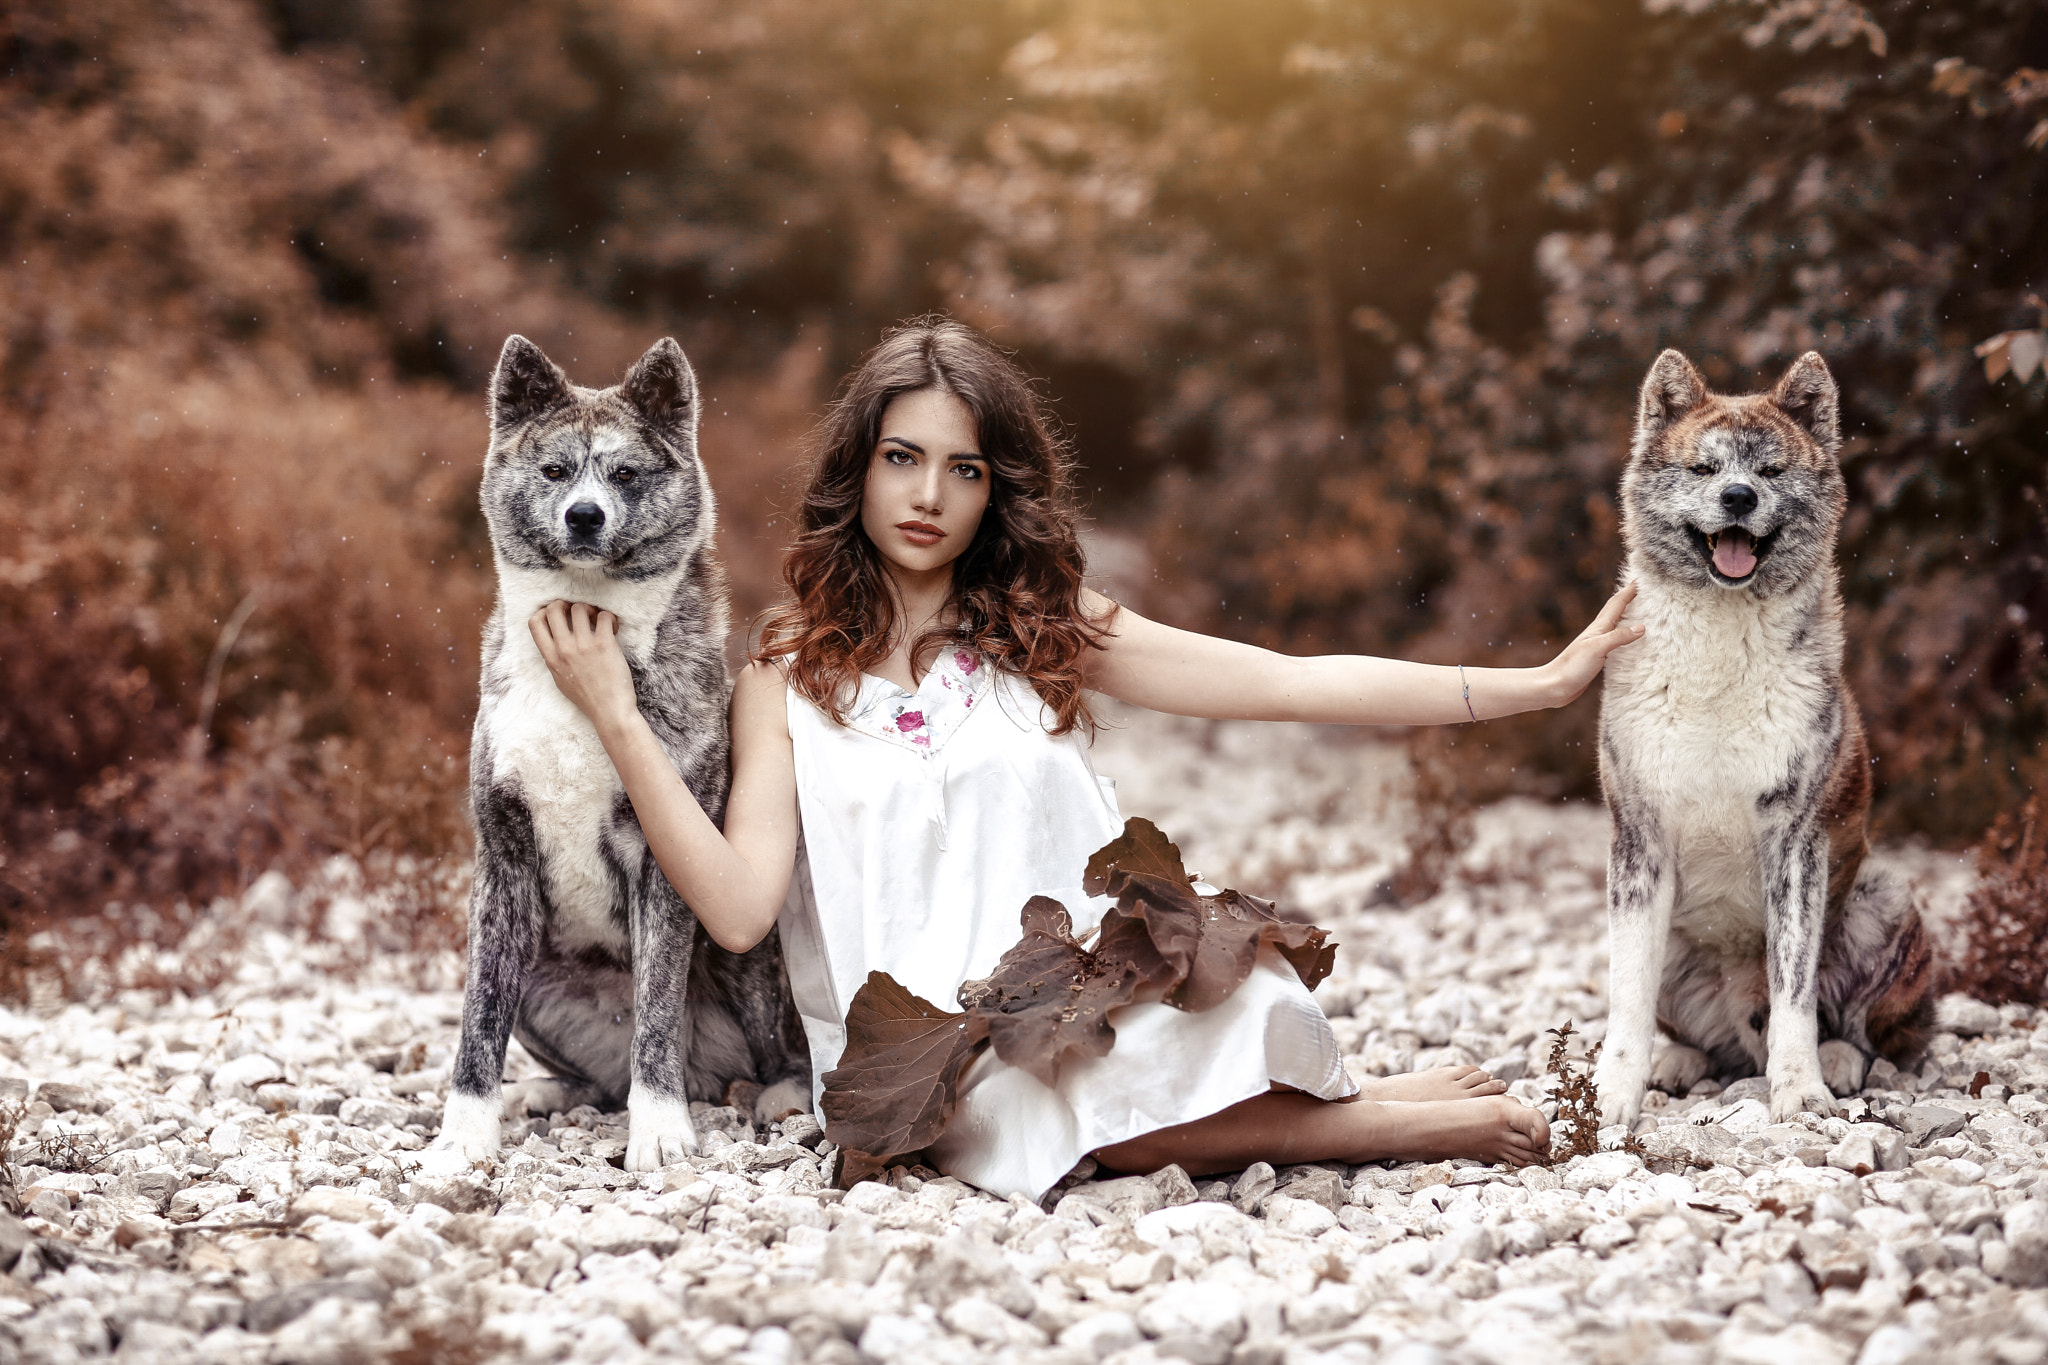 People 2048x1365 Alessandro Di Cicco women brunette long hair wavy hair looking at viewer white clothing animals wolf stones fall leaves Arianna Storace model women outdoors